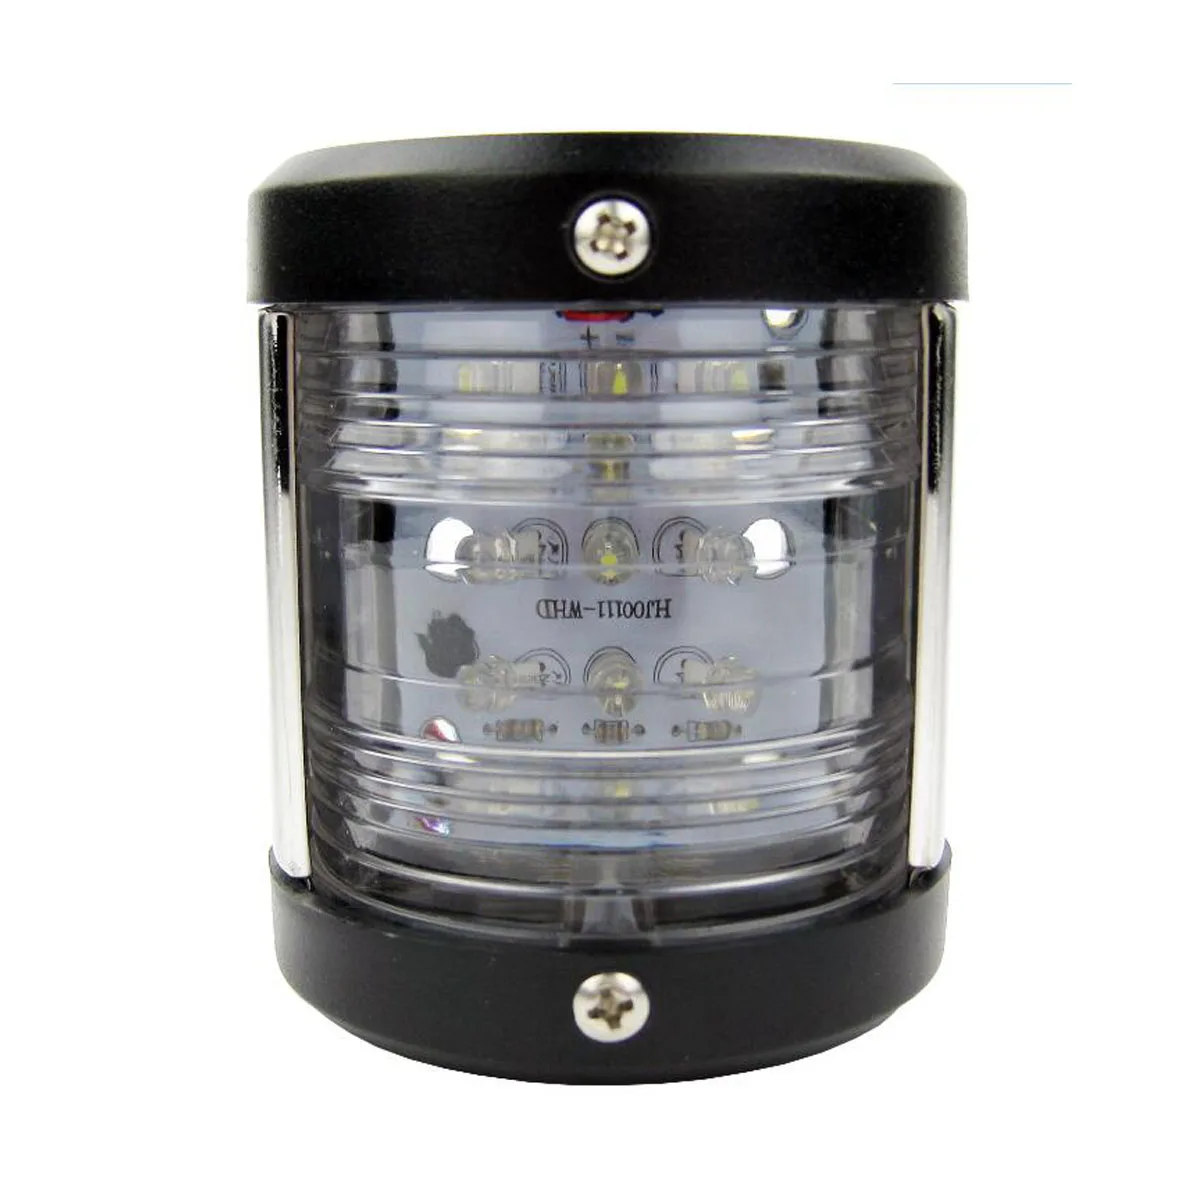 Boat Black Plastic 12V LED/Tungsten Low Side Lamp 225 Degree Waterproof Masthead and Stern Navigation White Light 360 degree 12v led tungsten filament lamp navigation light all round light boat singnal lamp for pontoon power and skiff